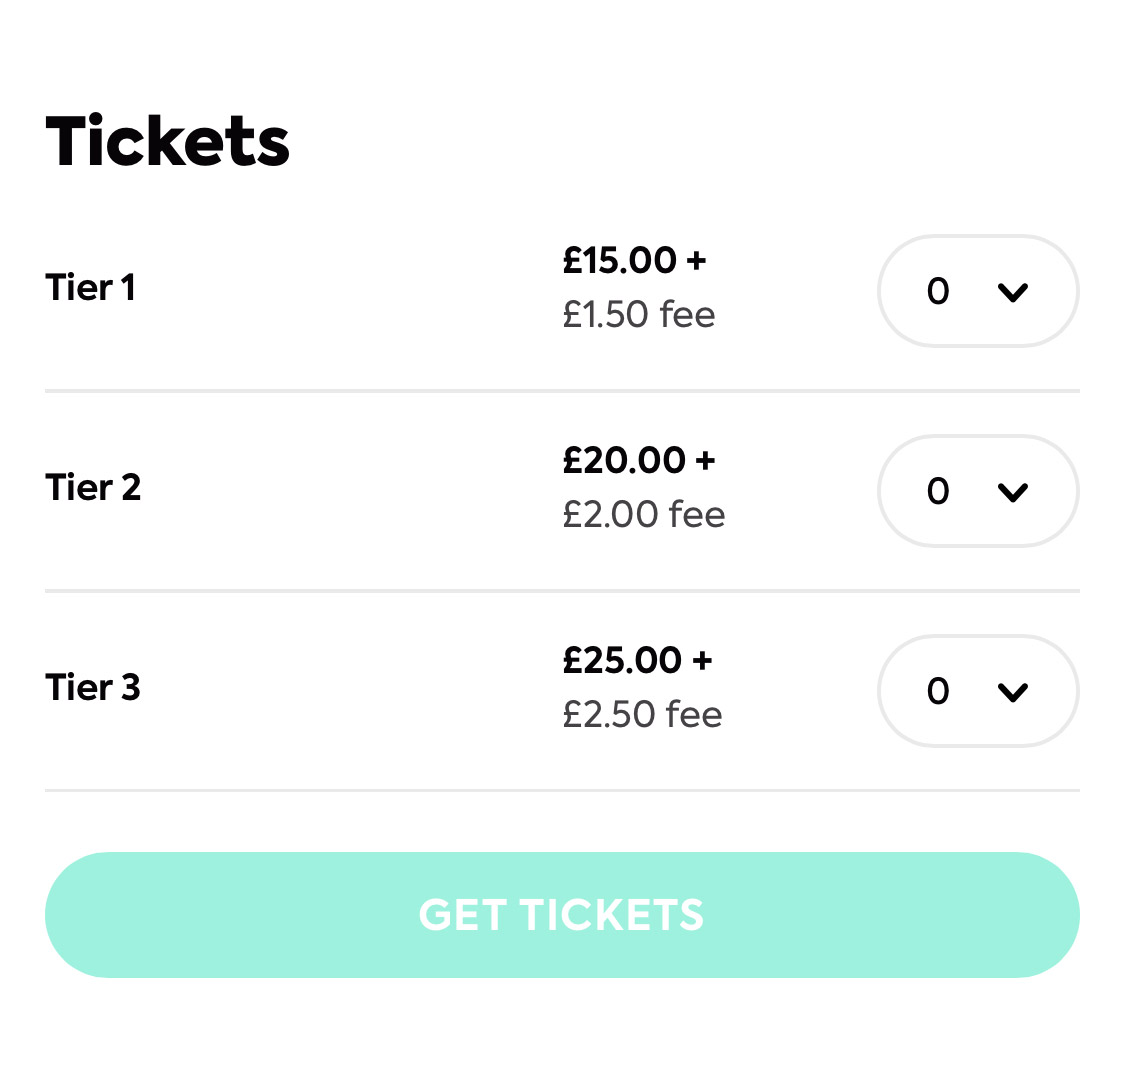 Rep_only_tickets_discount_not_showing